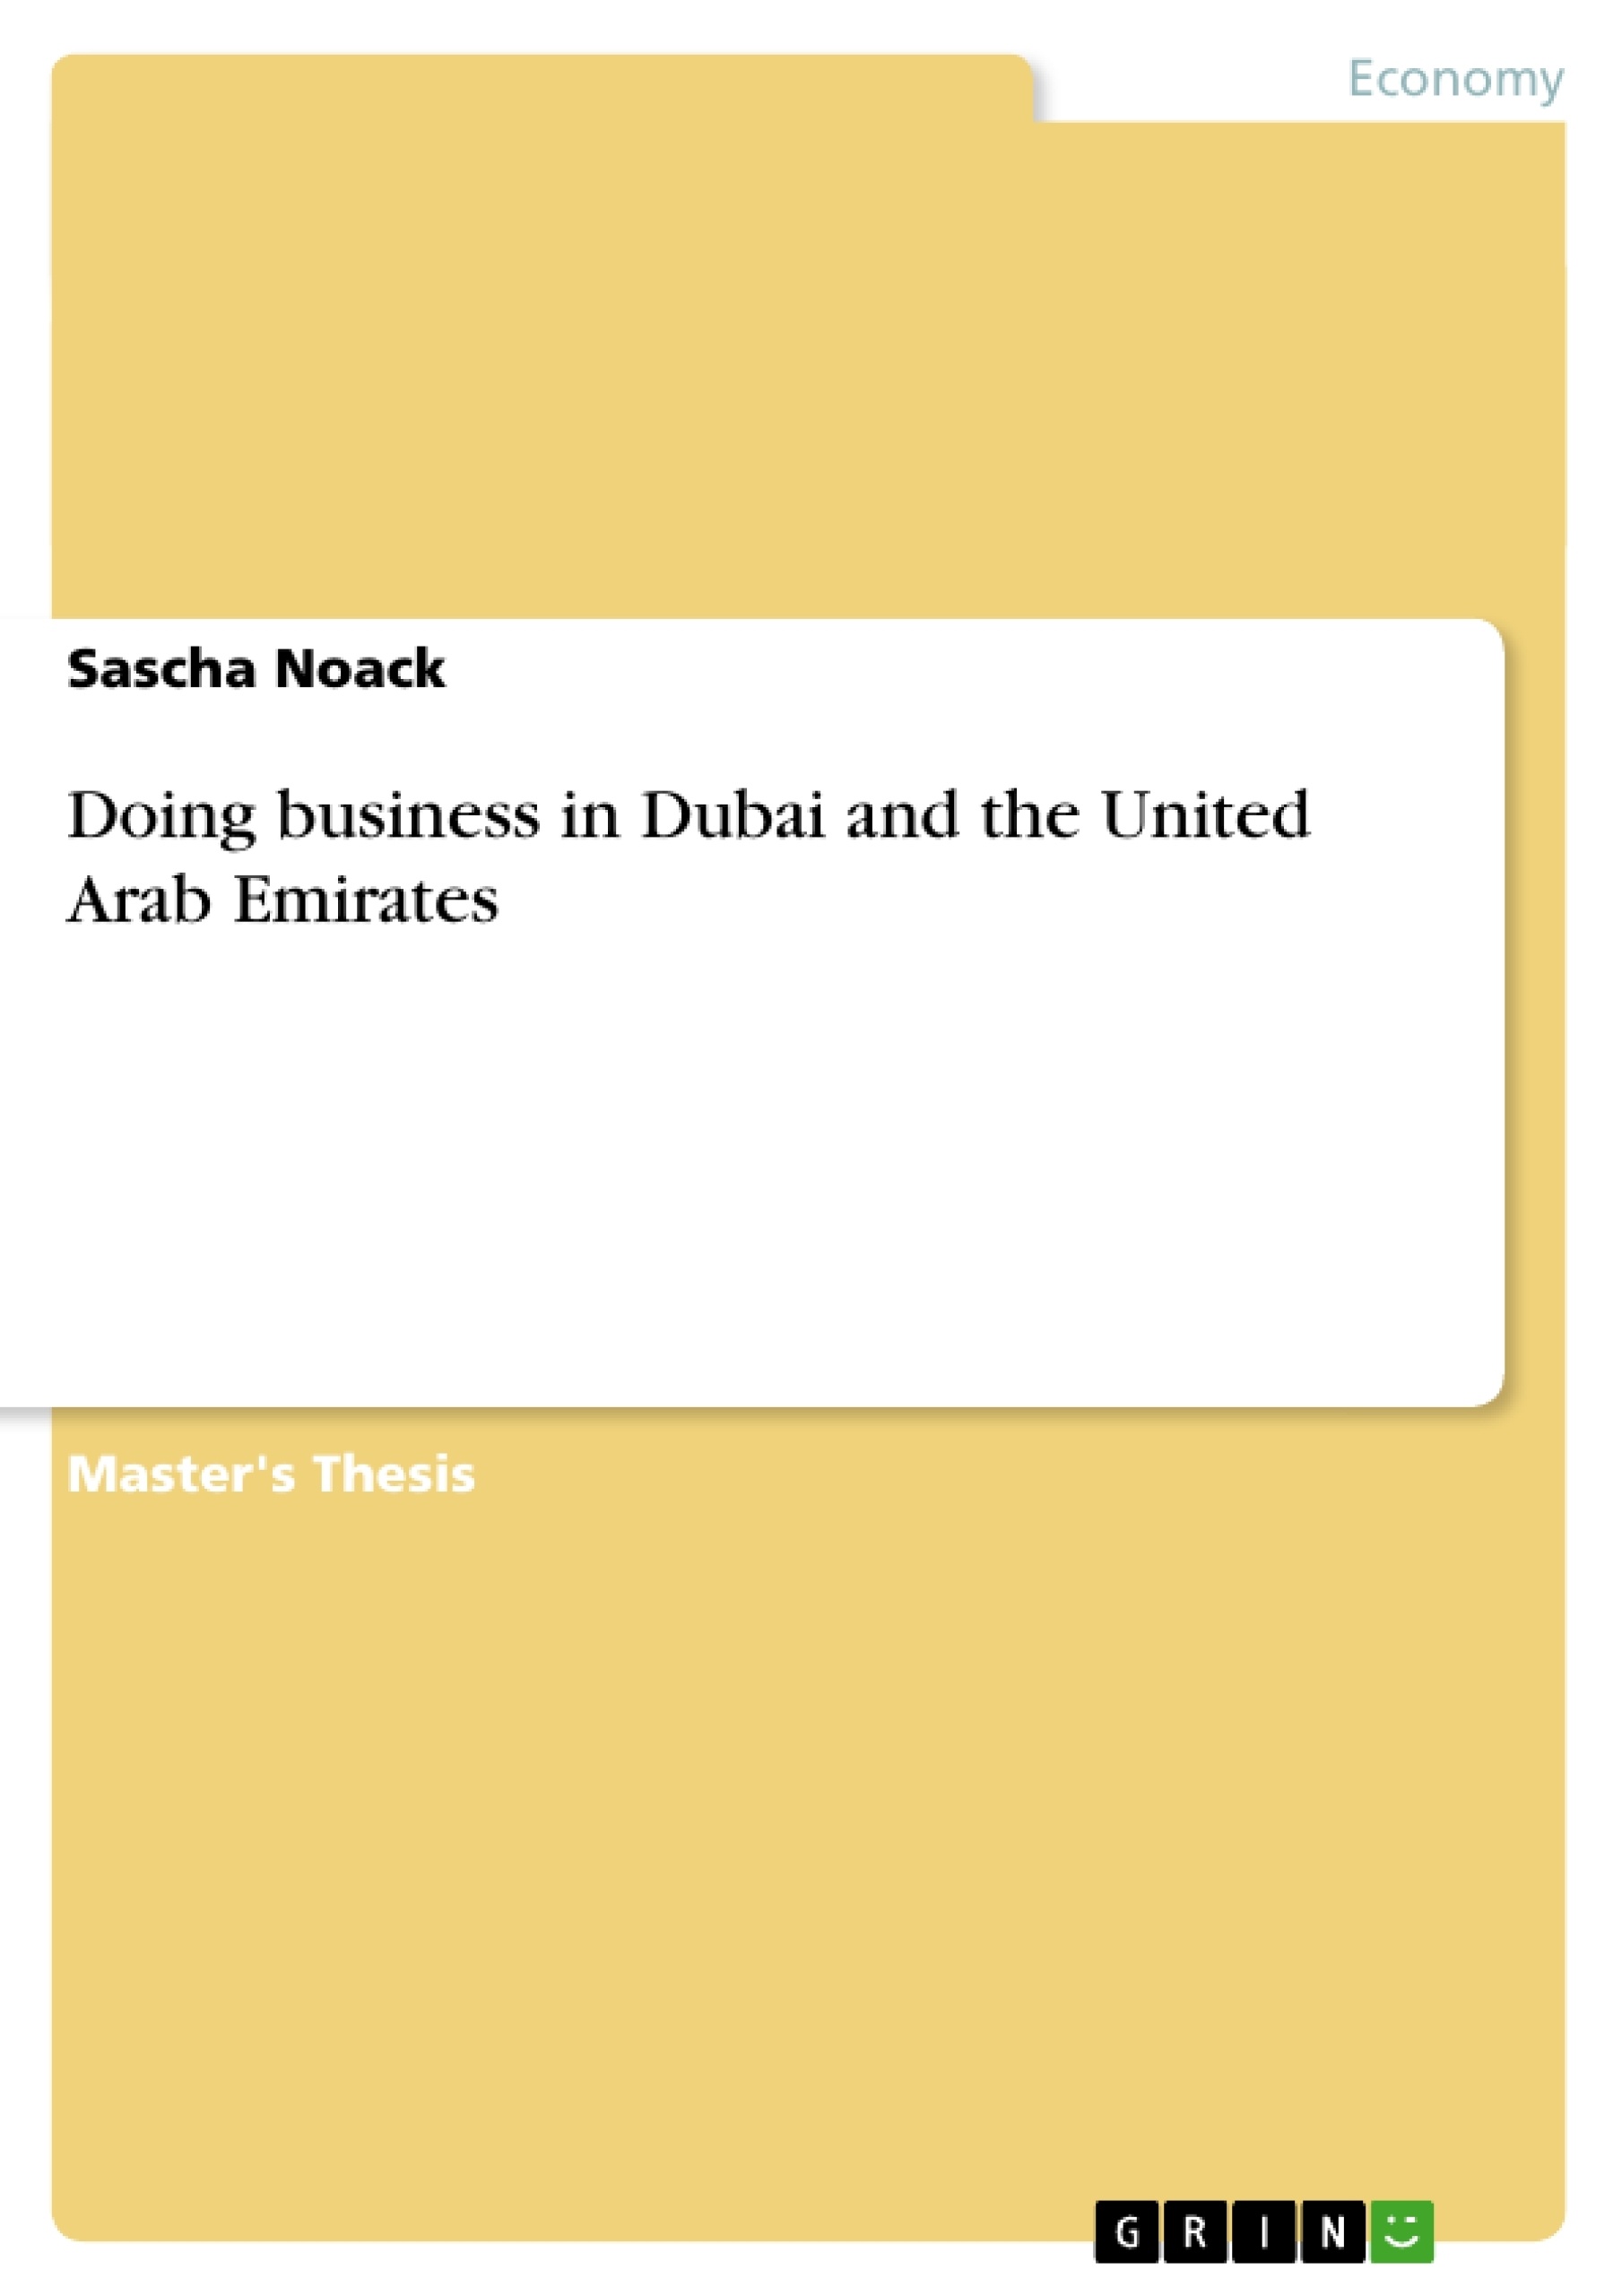 Title: Doing business in Dubai and the United Arab Emirates